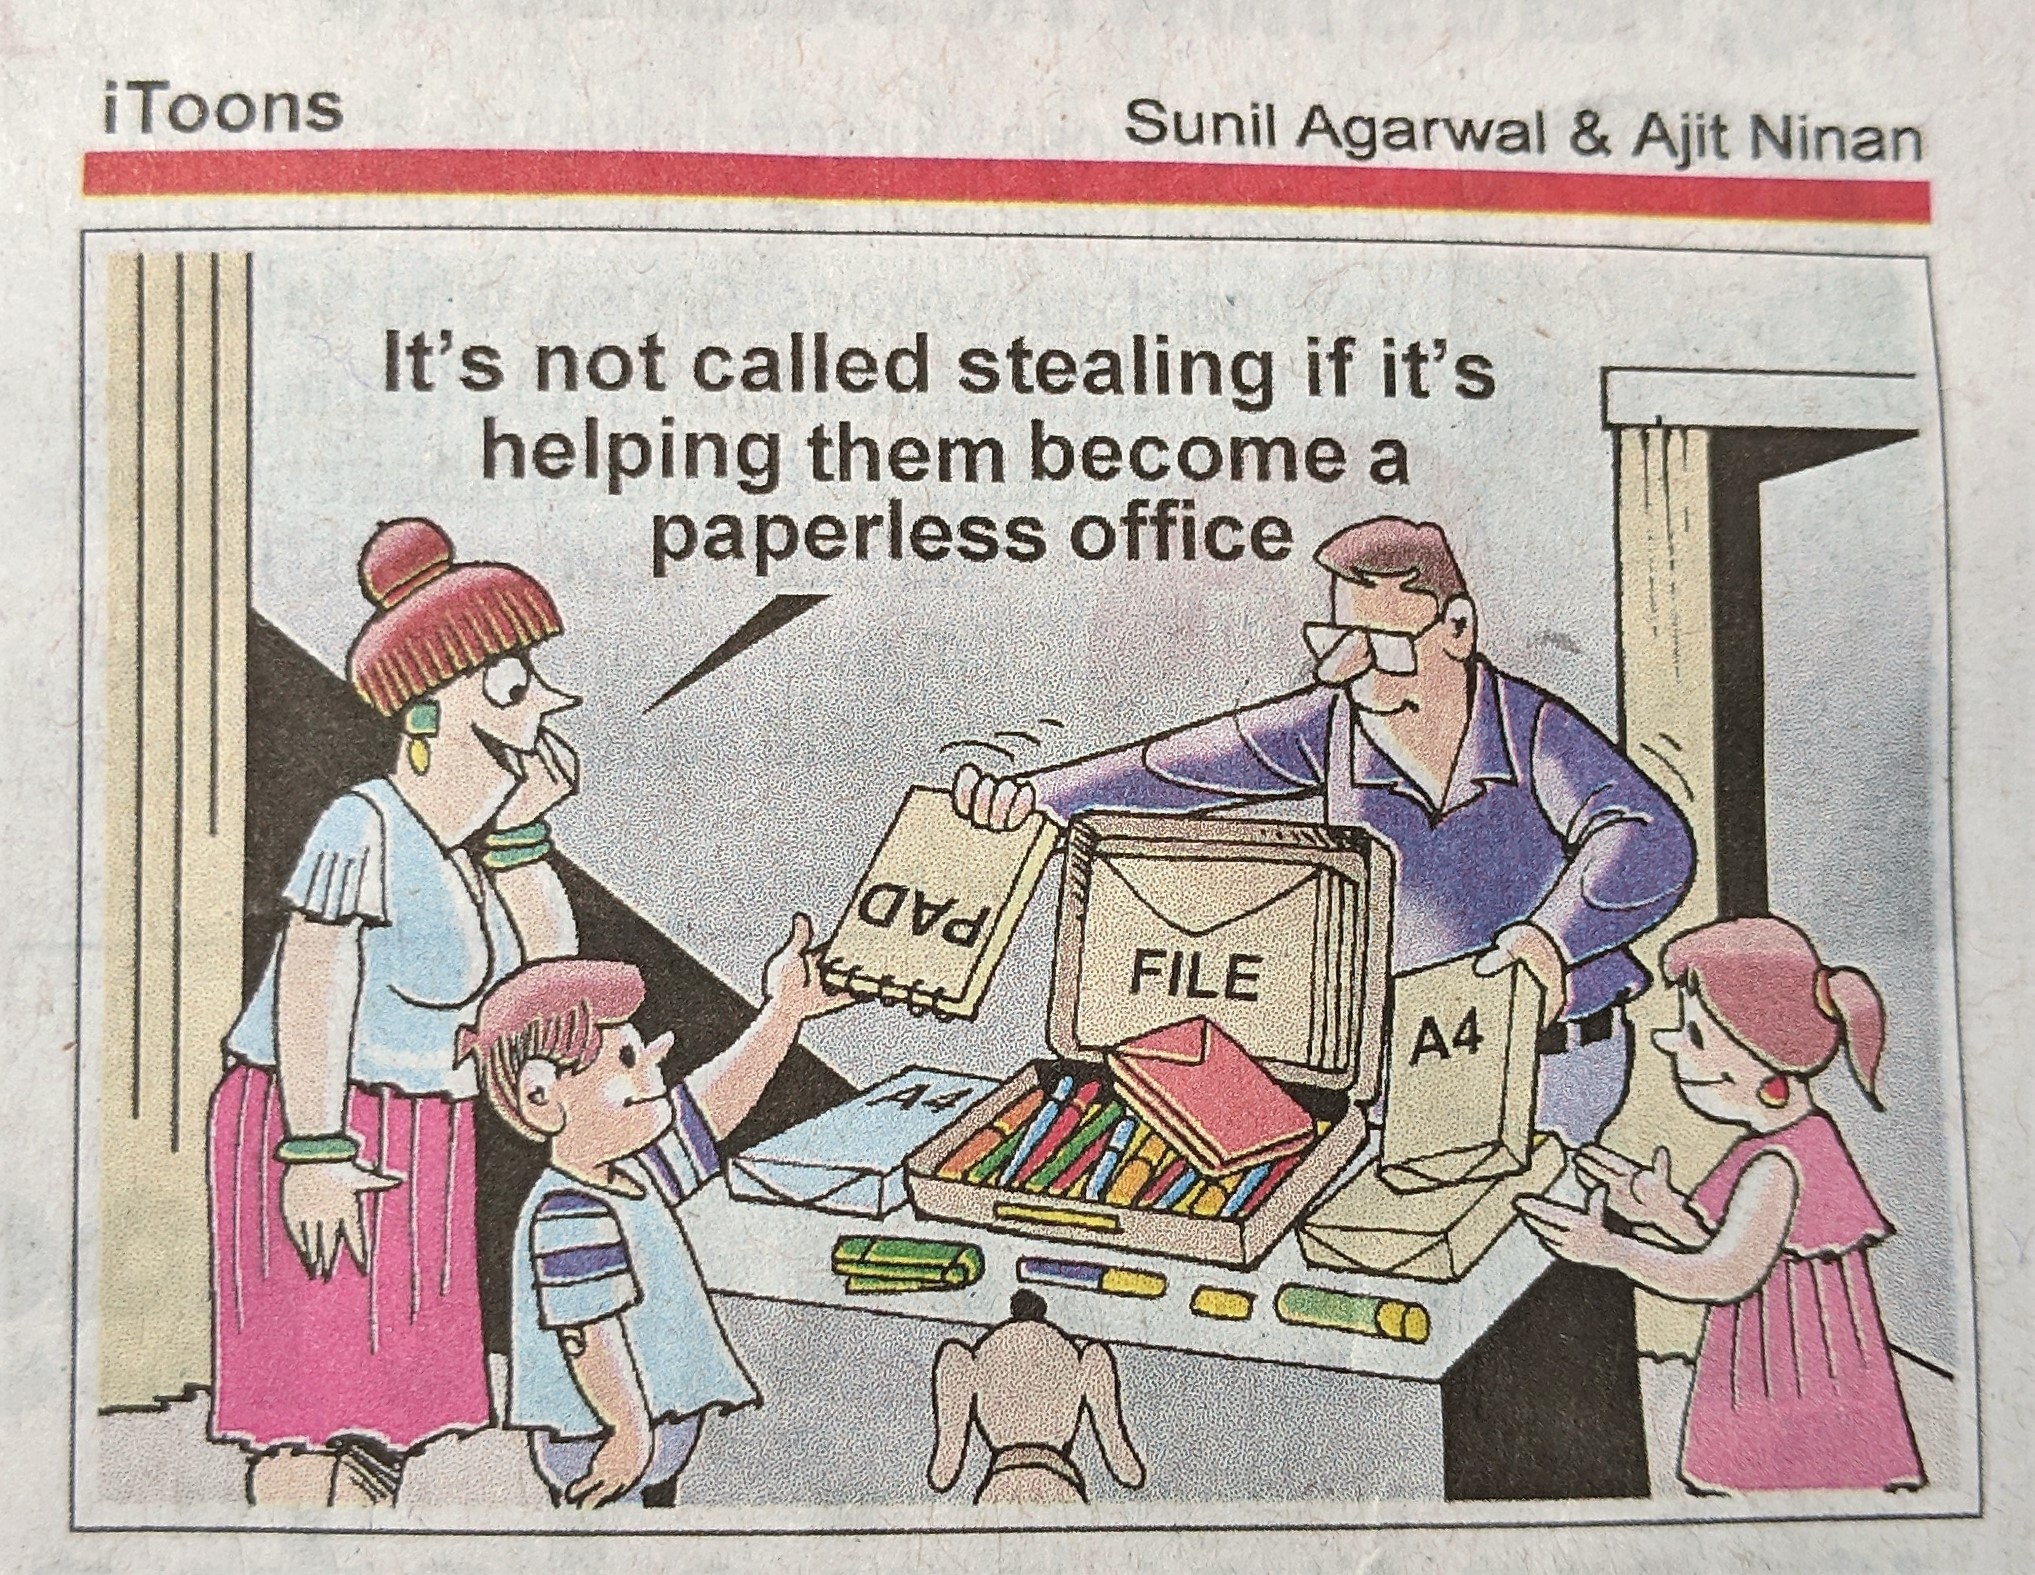 It's not called stealing if it's helping them become a paperless office by Sunil Agarwal and Ajit Ninan